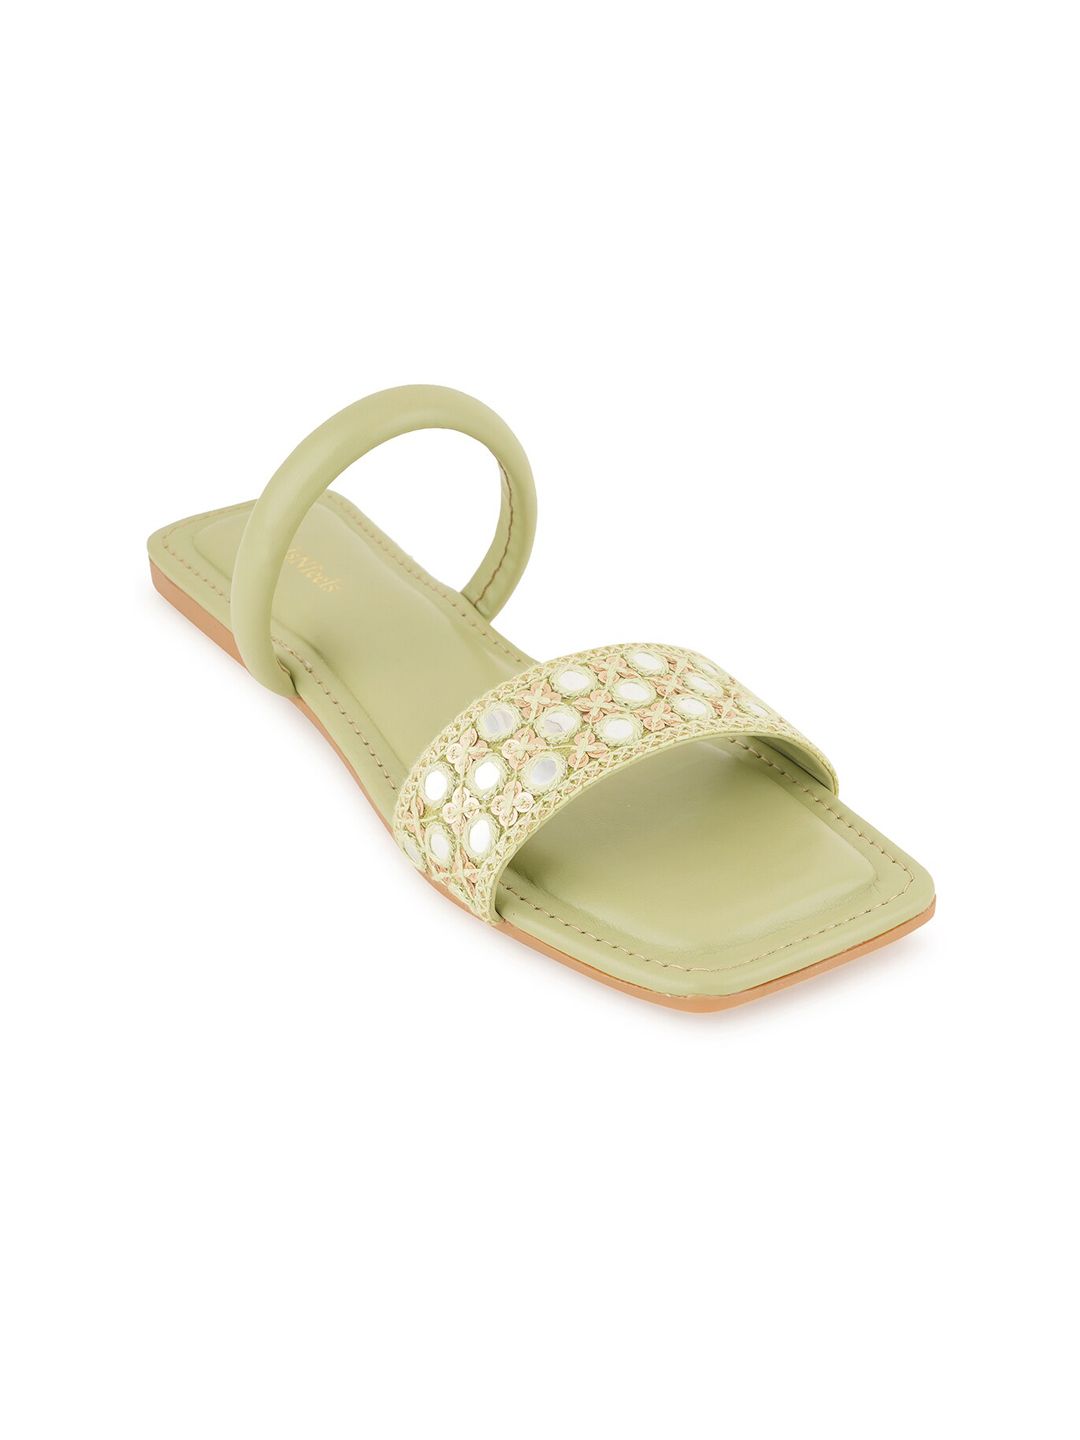 HEELSNFEELS Embellished Open Toe Flats Price in India